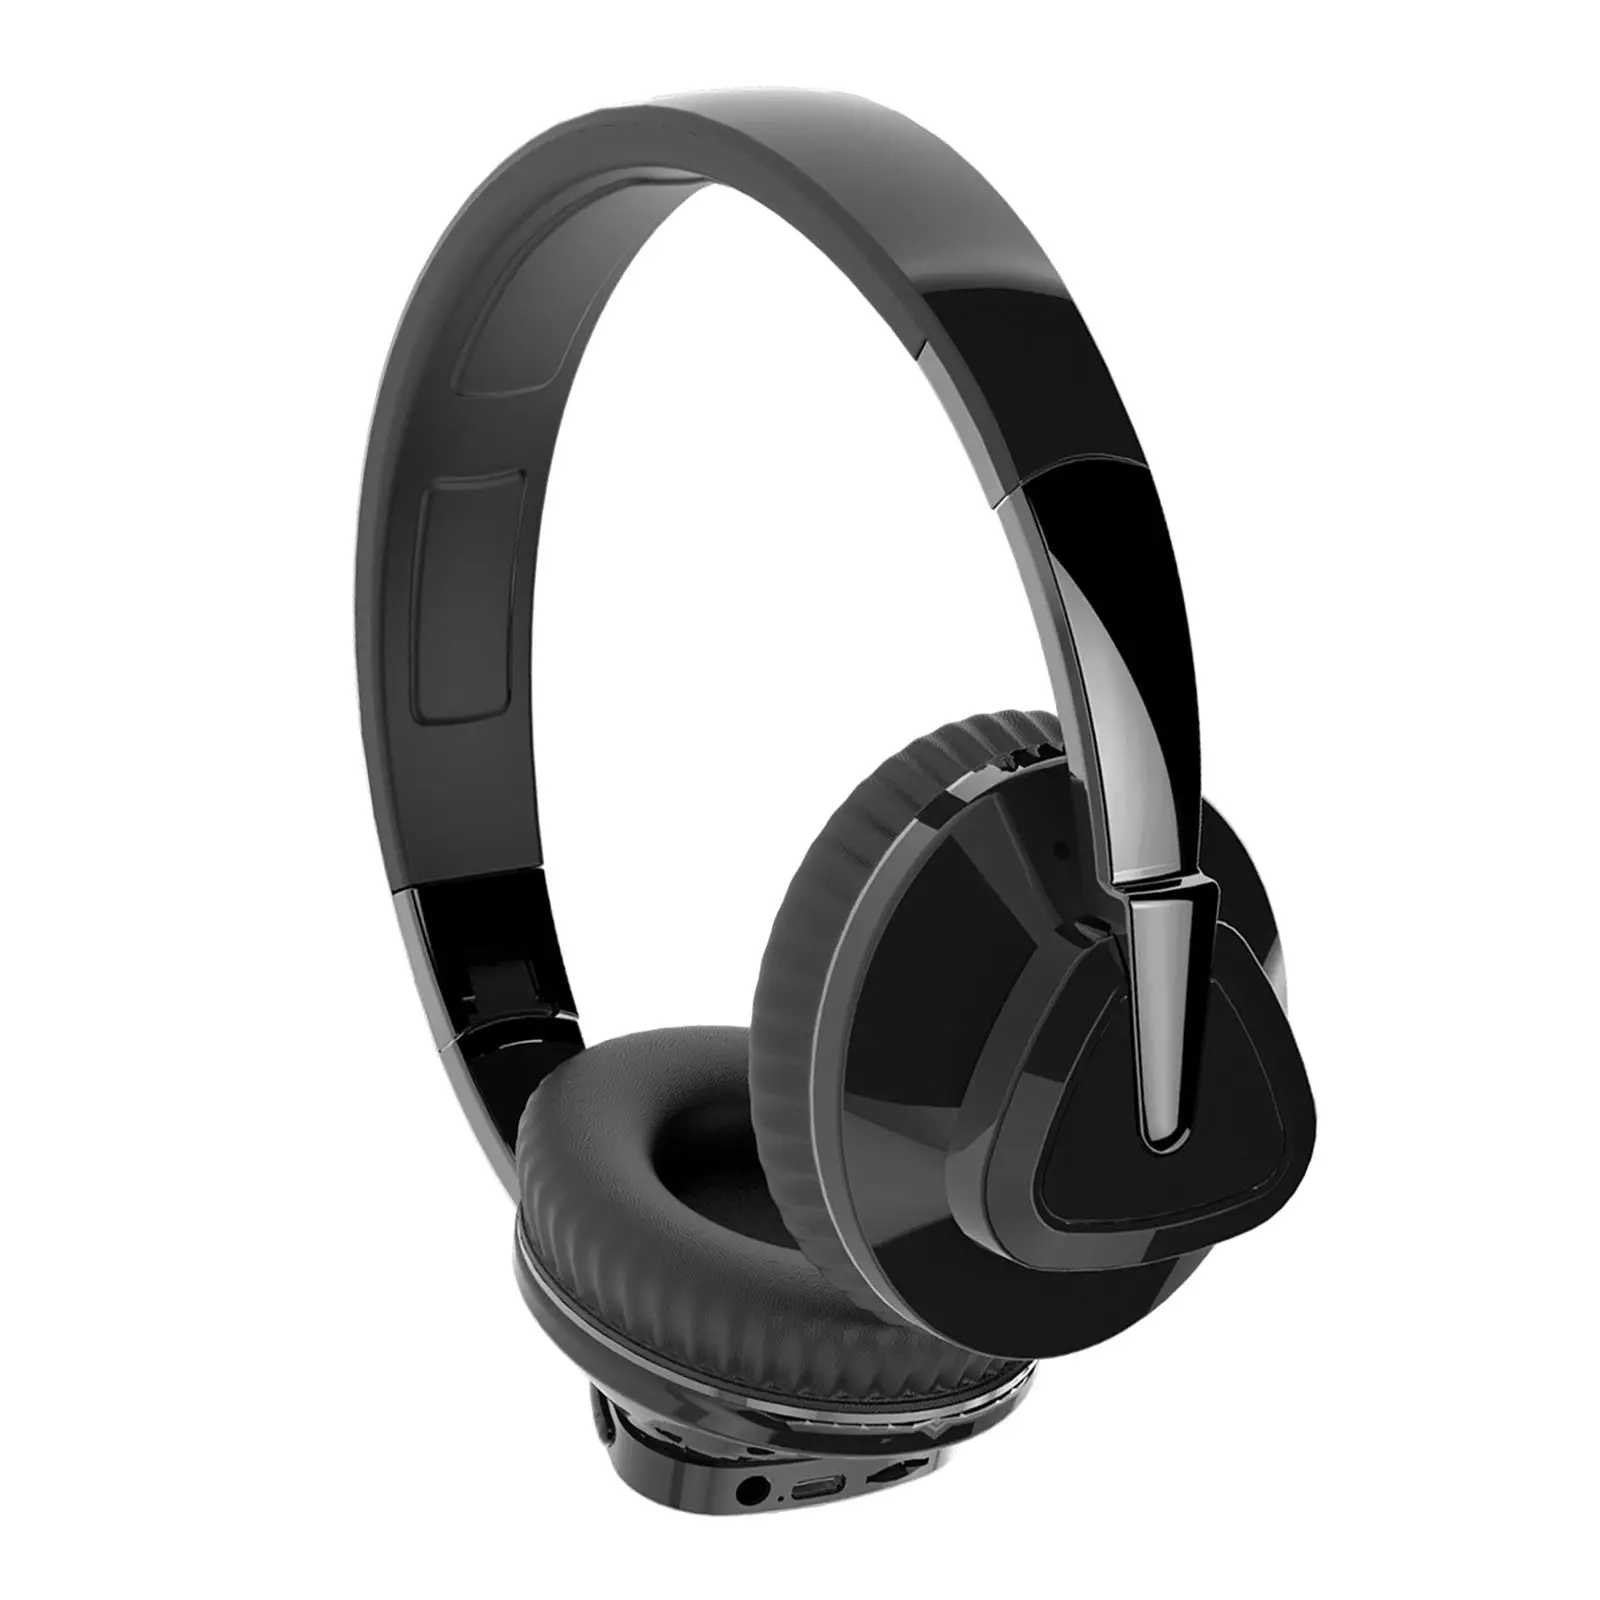 Bluetooth Over Ear Headphones Soft Protein Earpads Foldable 24H Playtime Wireless Headset for TV PC Computer Work Home Office